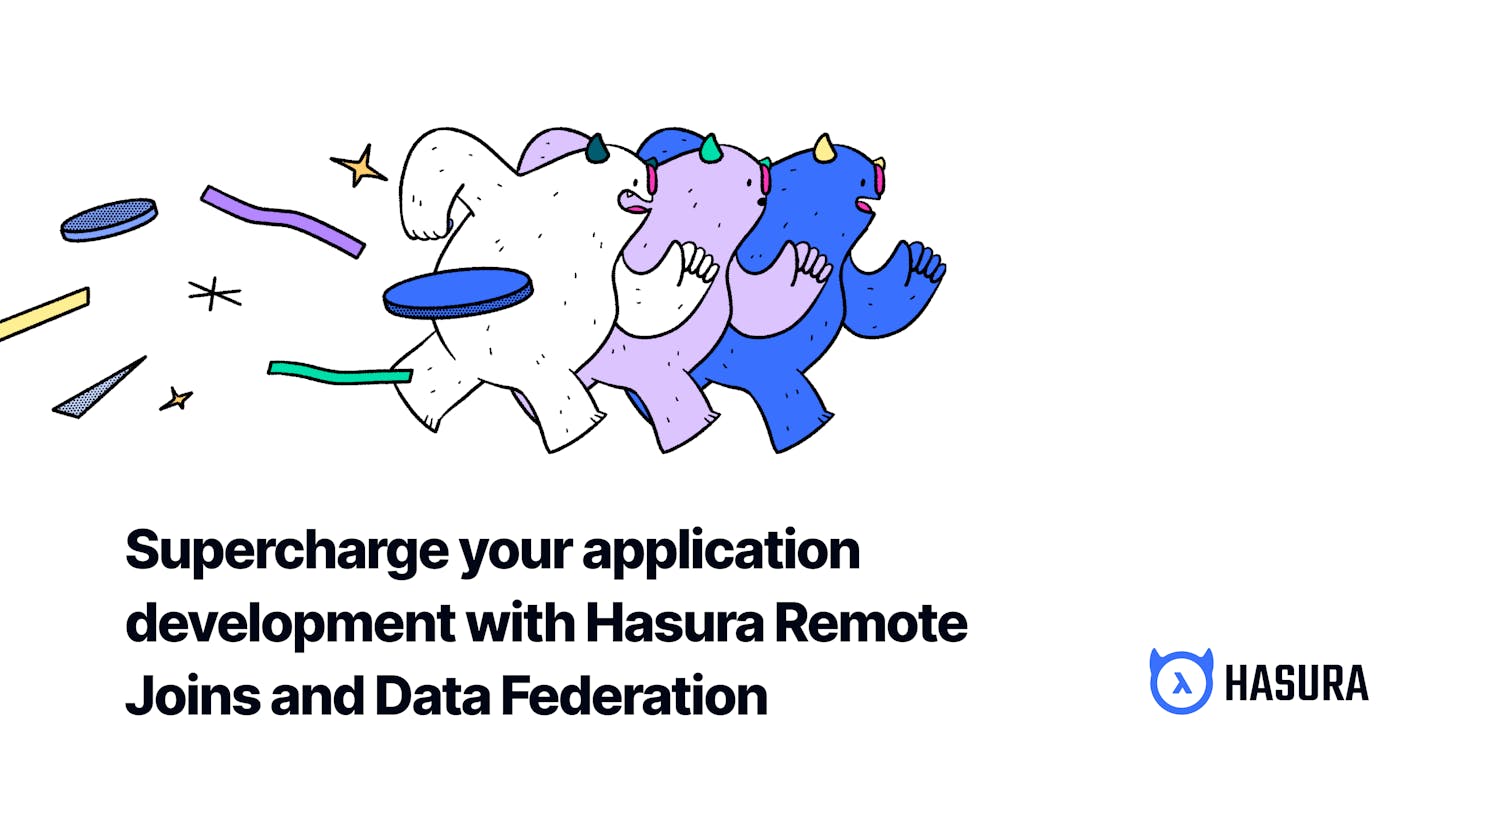 Supercharge app development with Hasura Remote Joins and Data Federation